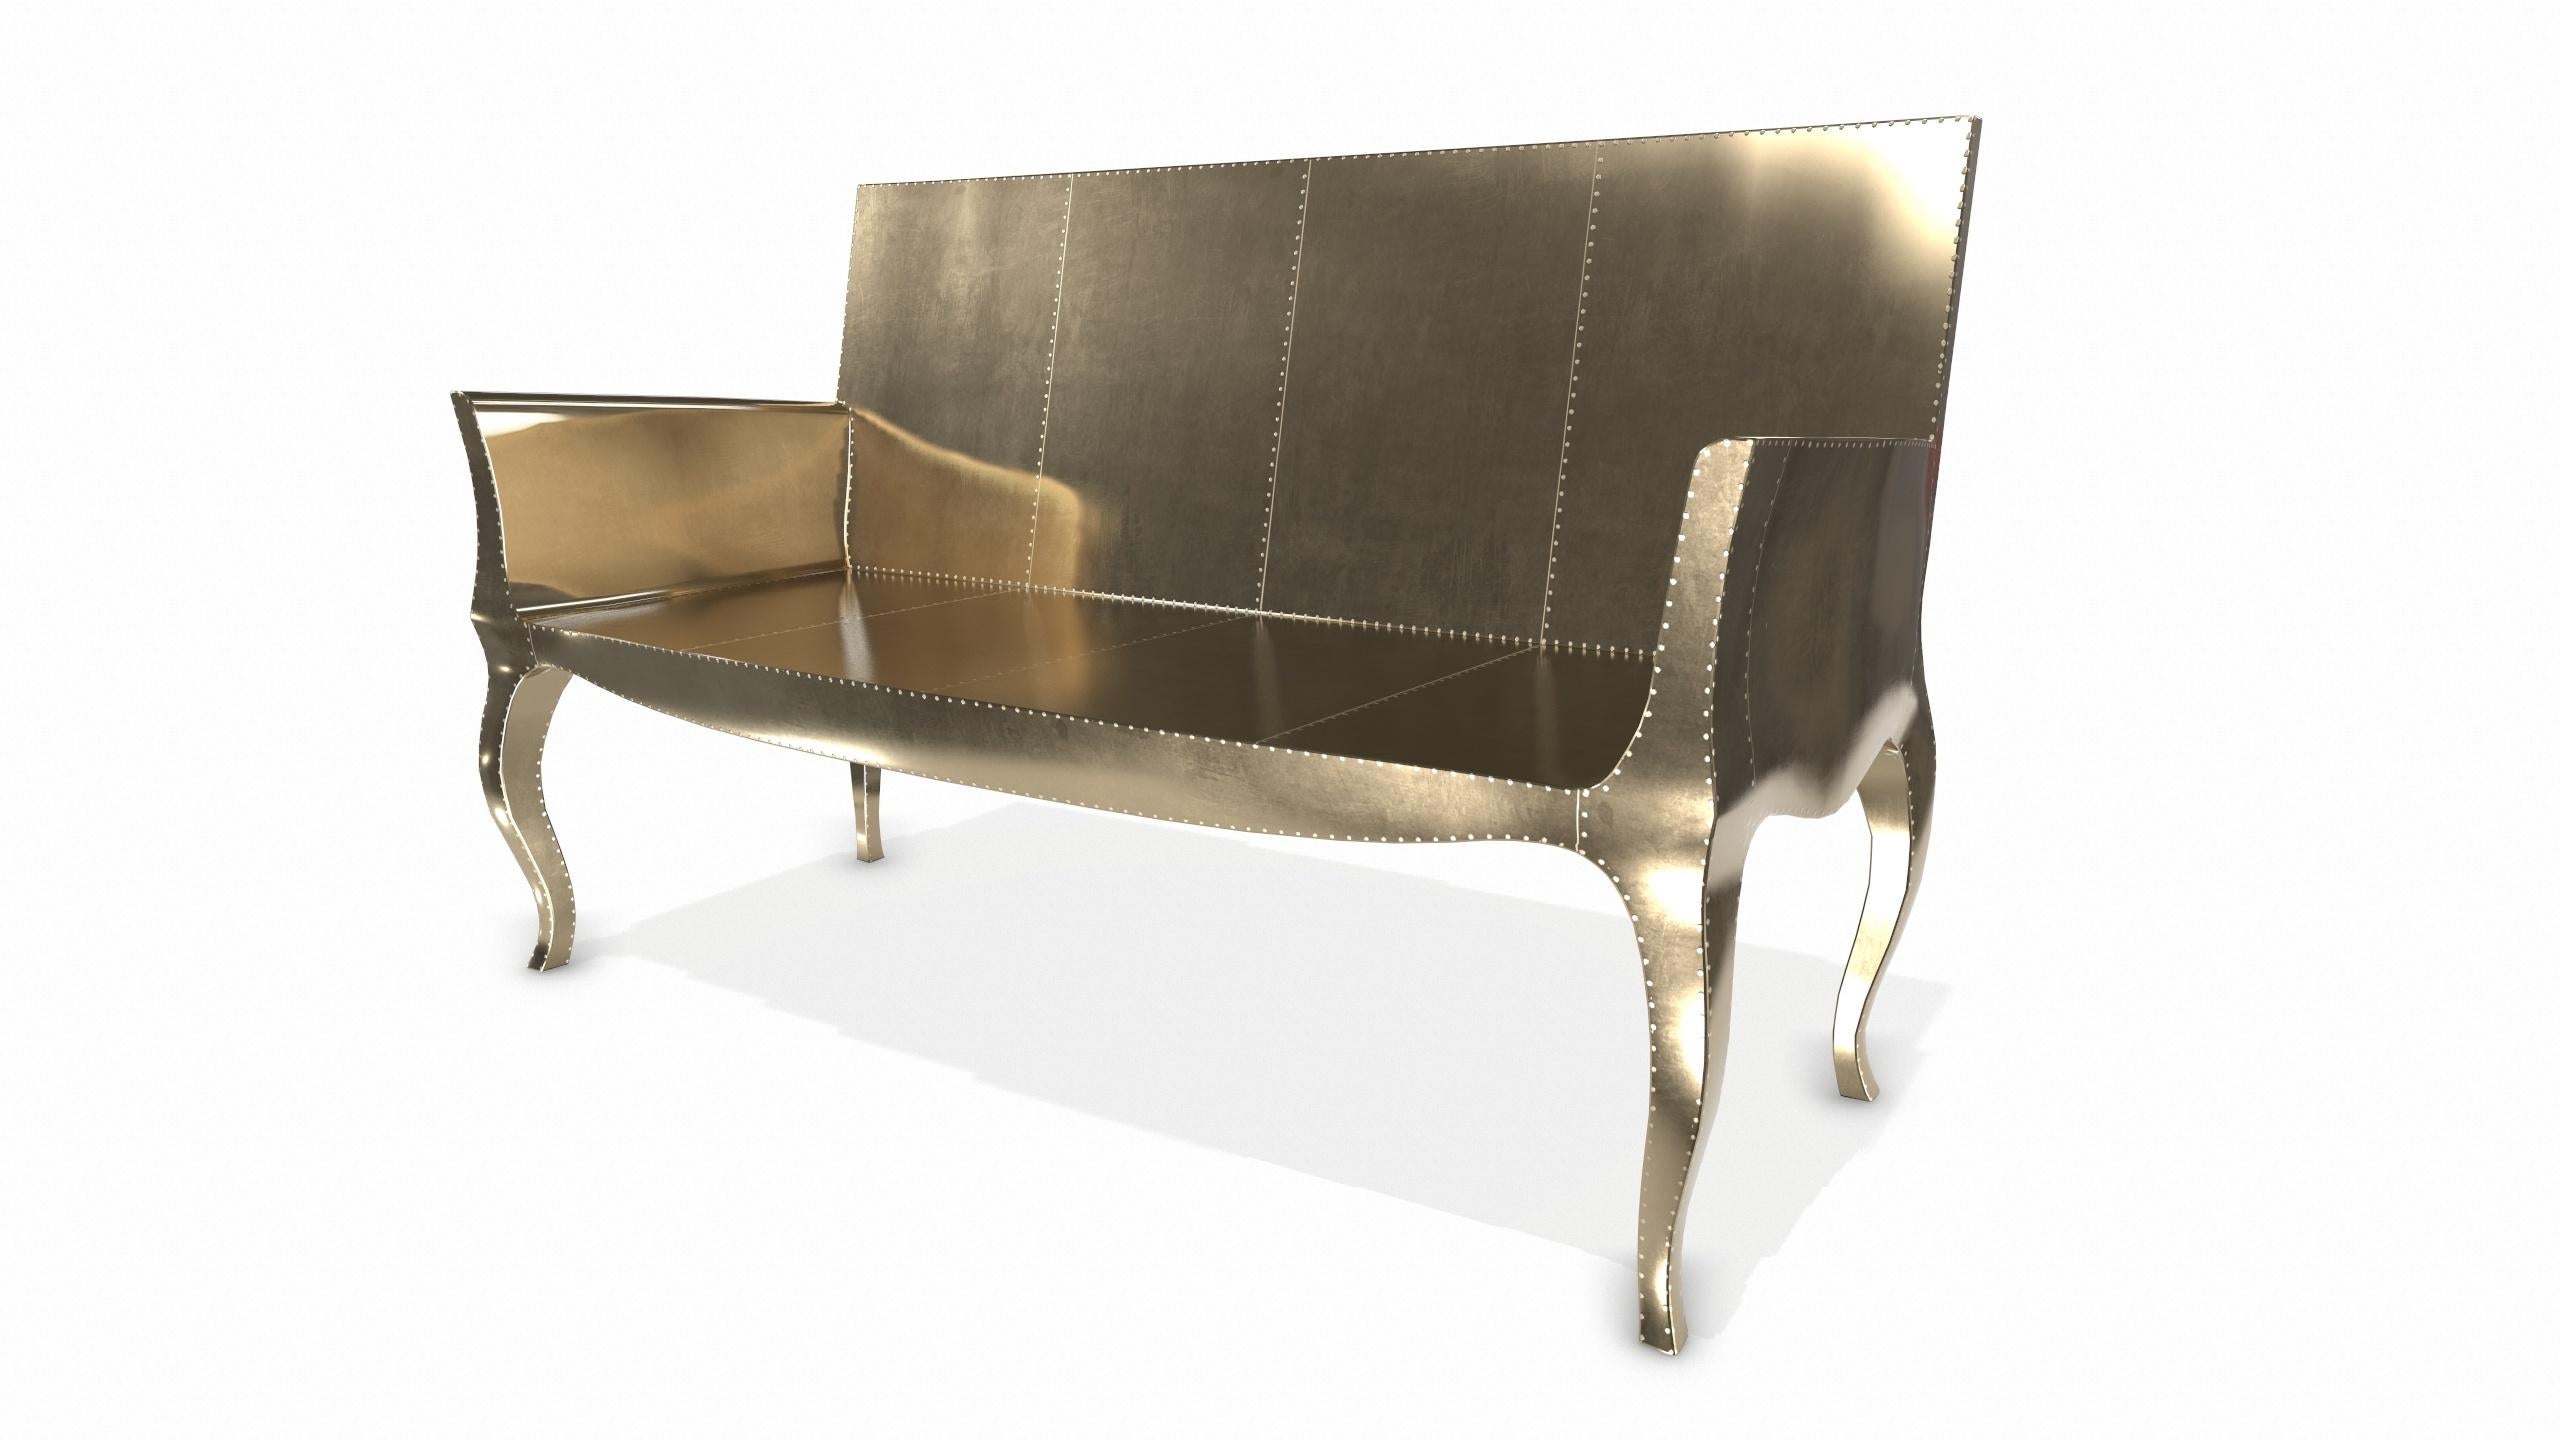 American Louise Settee Art Deco Living Room Sets in Smooth Brass by Paul Mathieu For Sale